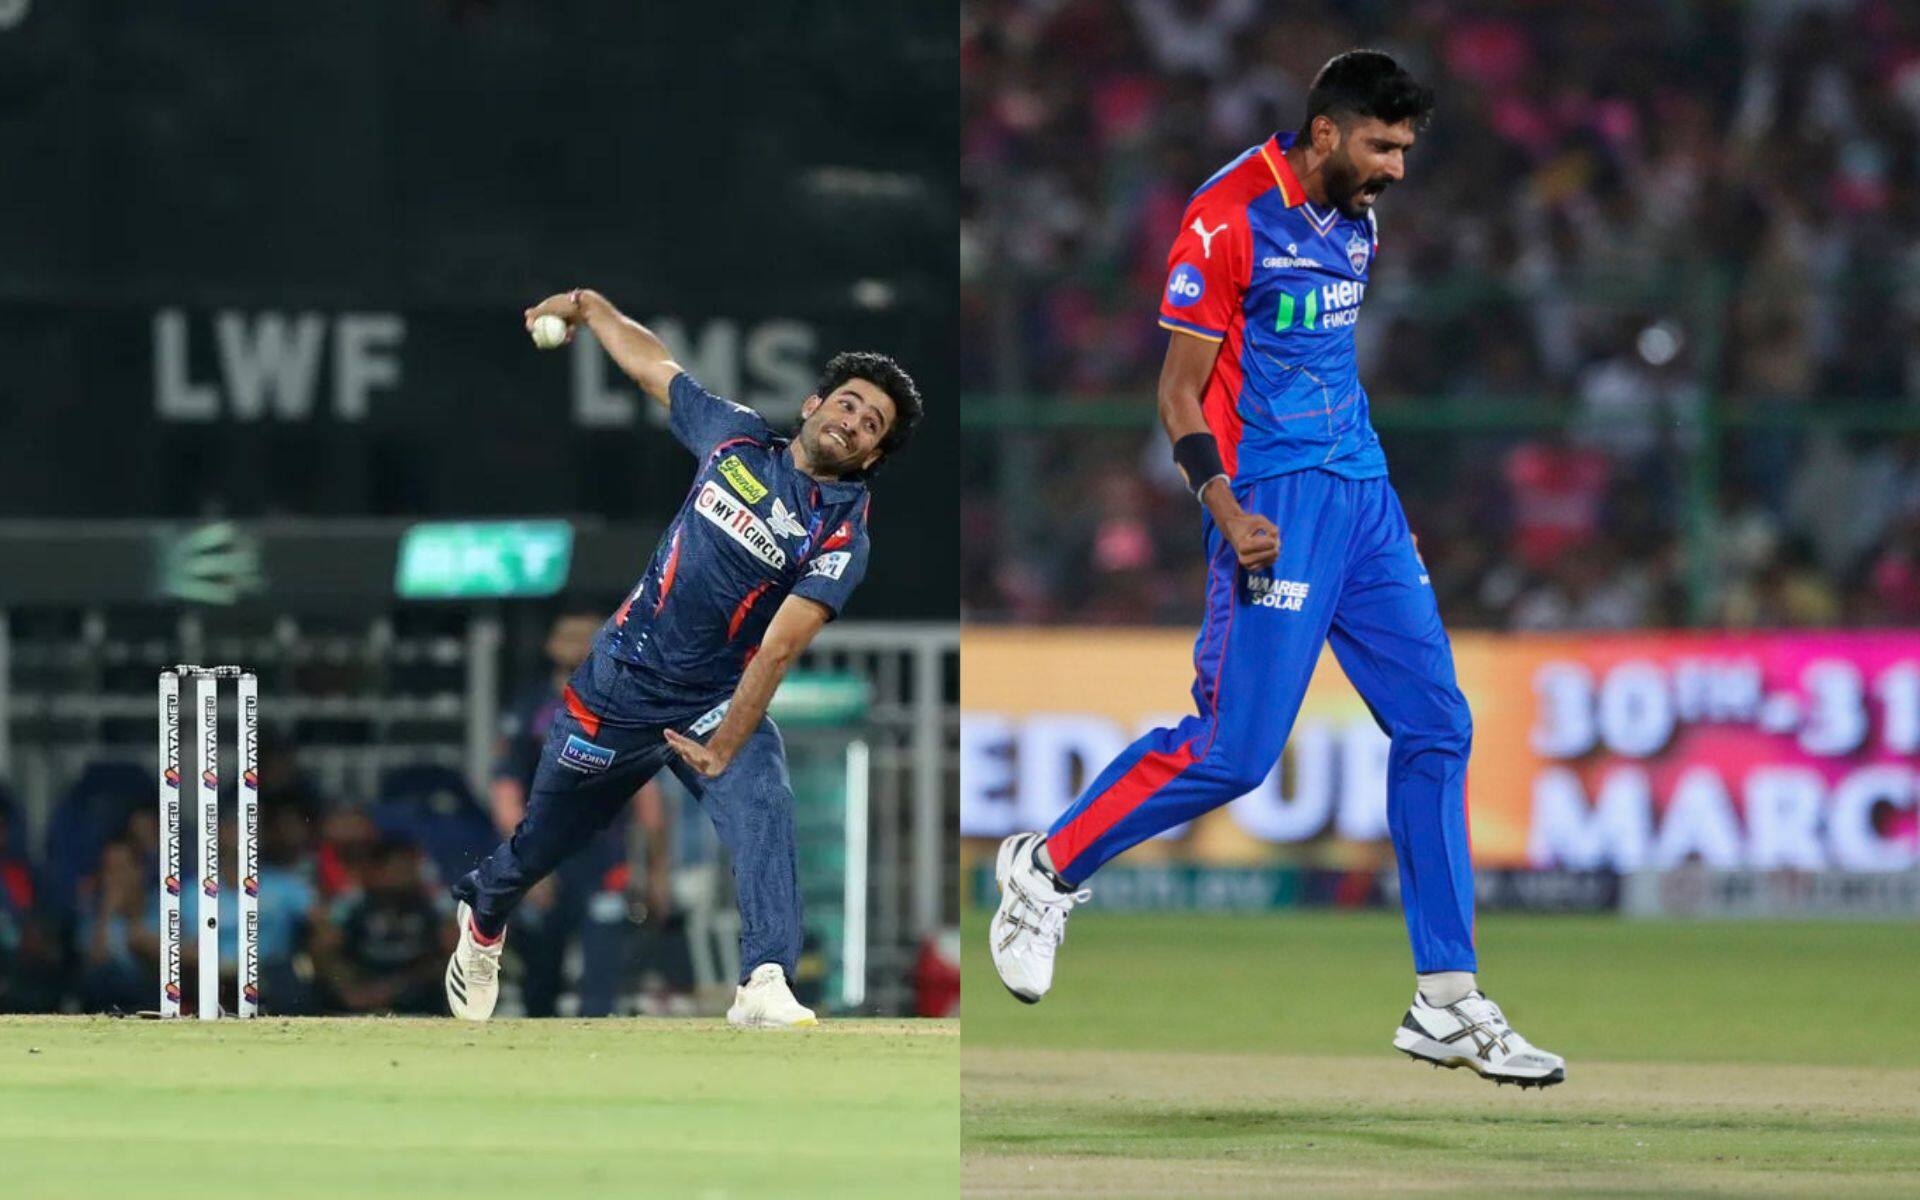 Ravi Bishnoi and Khaleel Ahmed could be crucial for their teams in this game [iplt20.com/AP Photos]